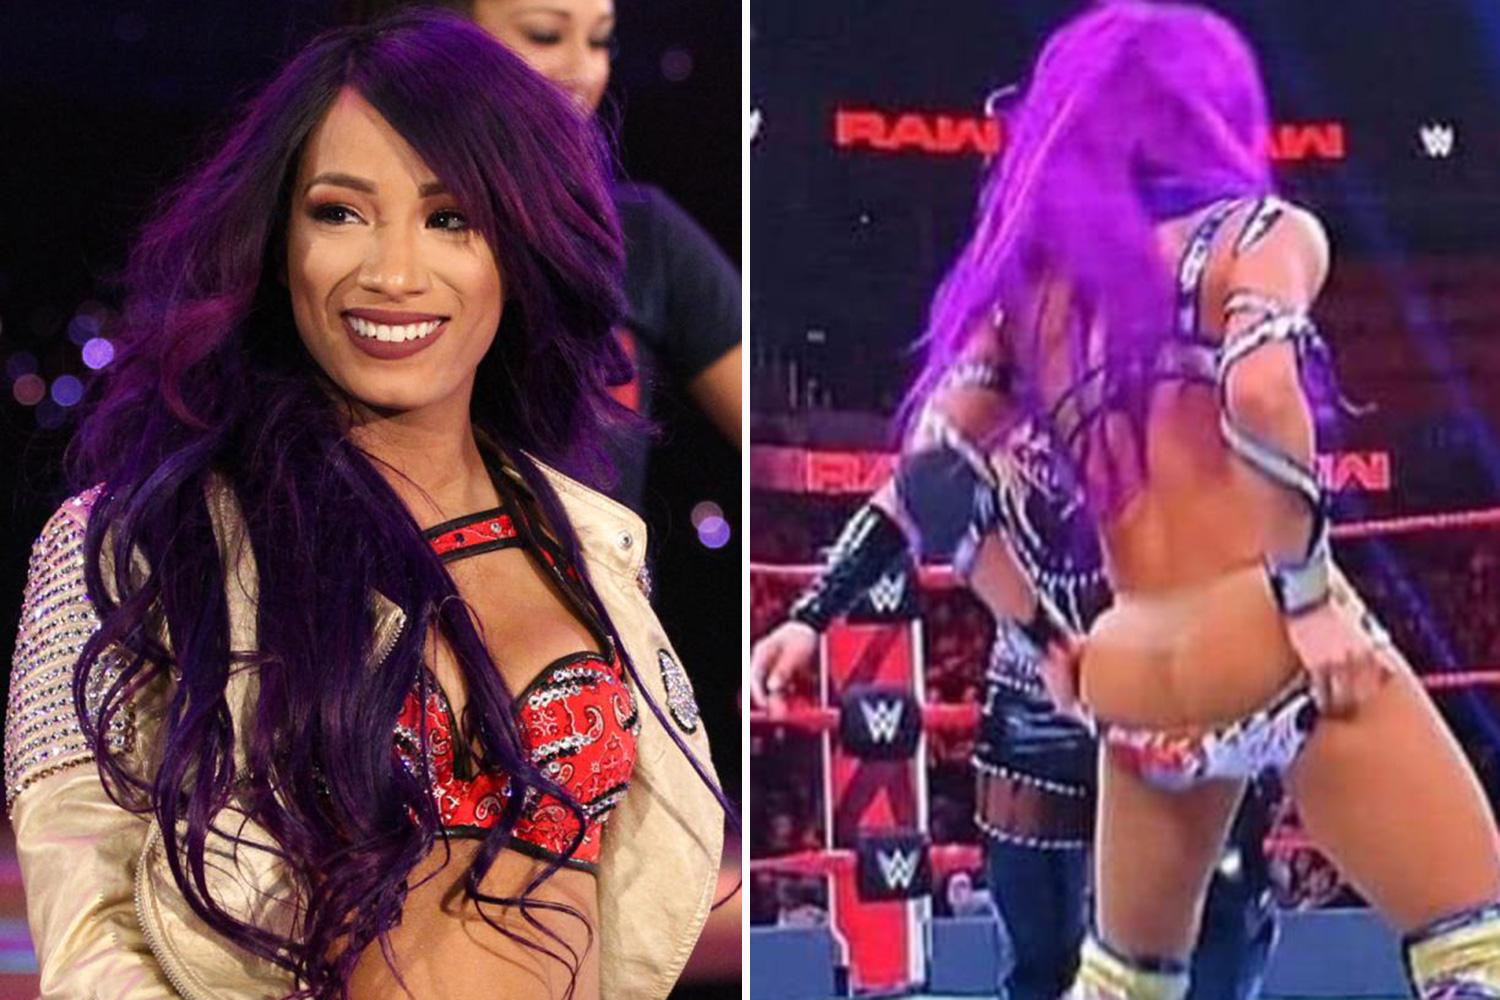 chaz graham recommends has sasha banks ever been nude pic